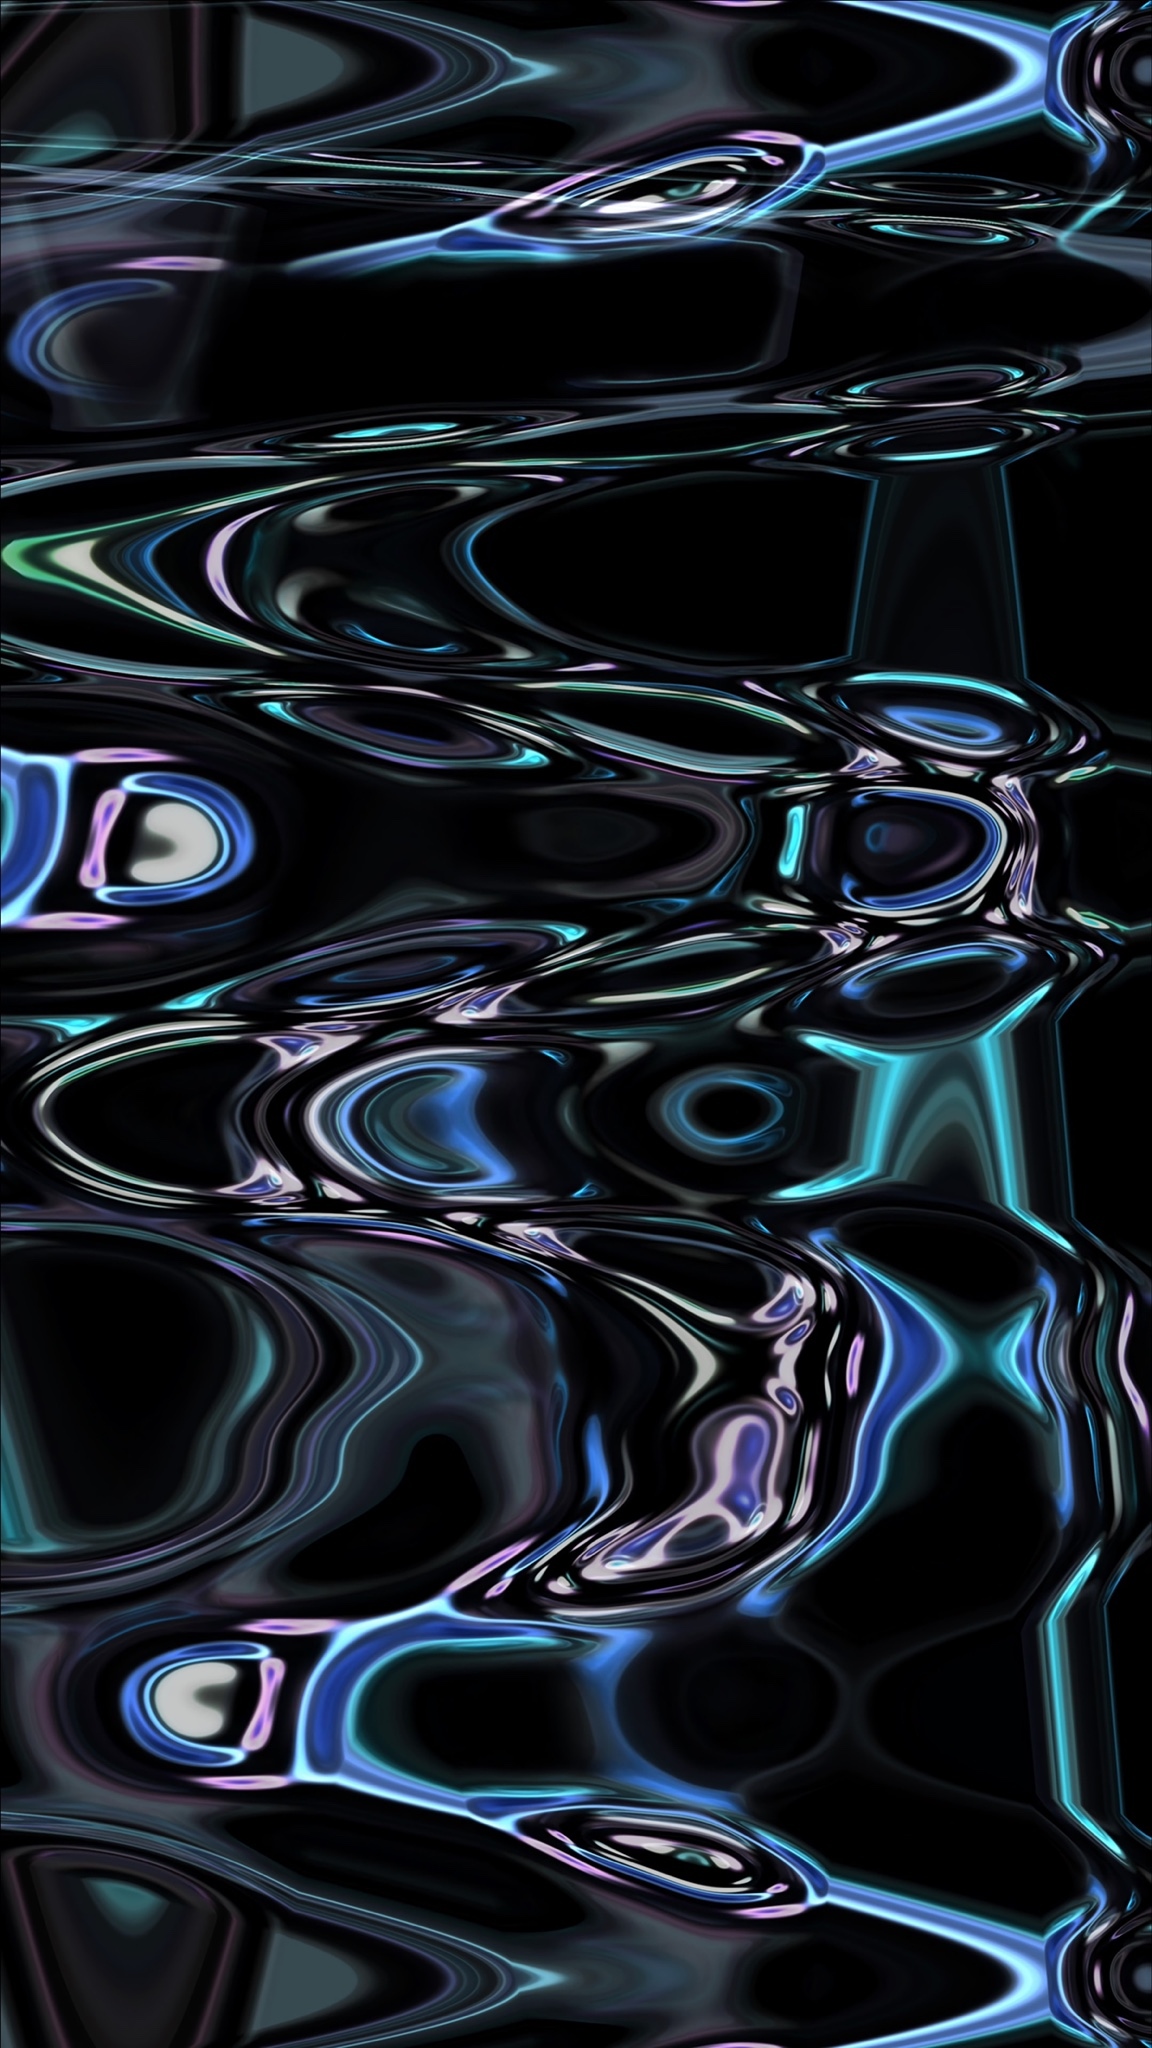 A black and blue abstract artwork - 3D